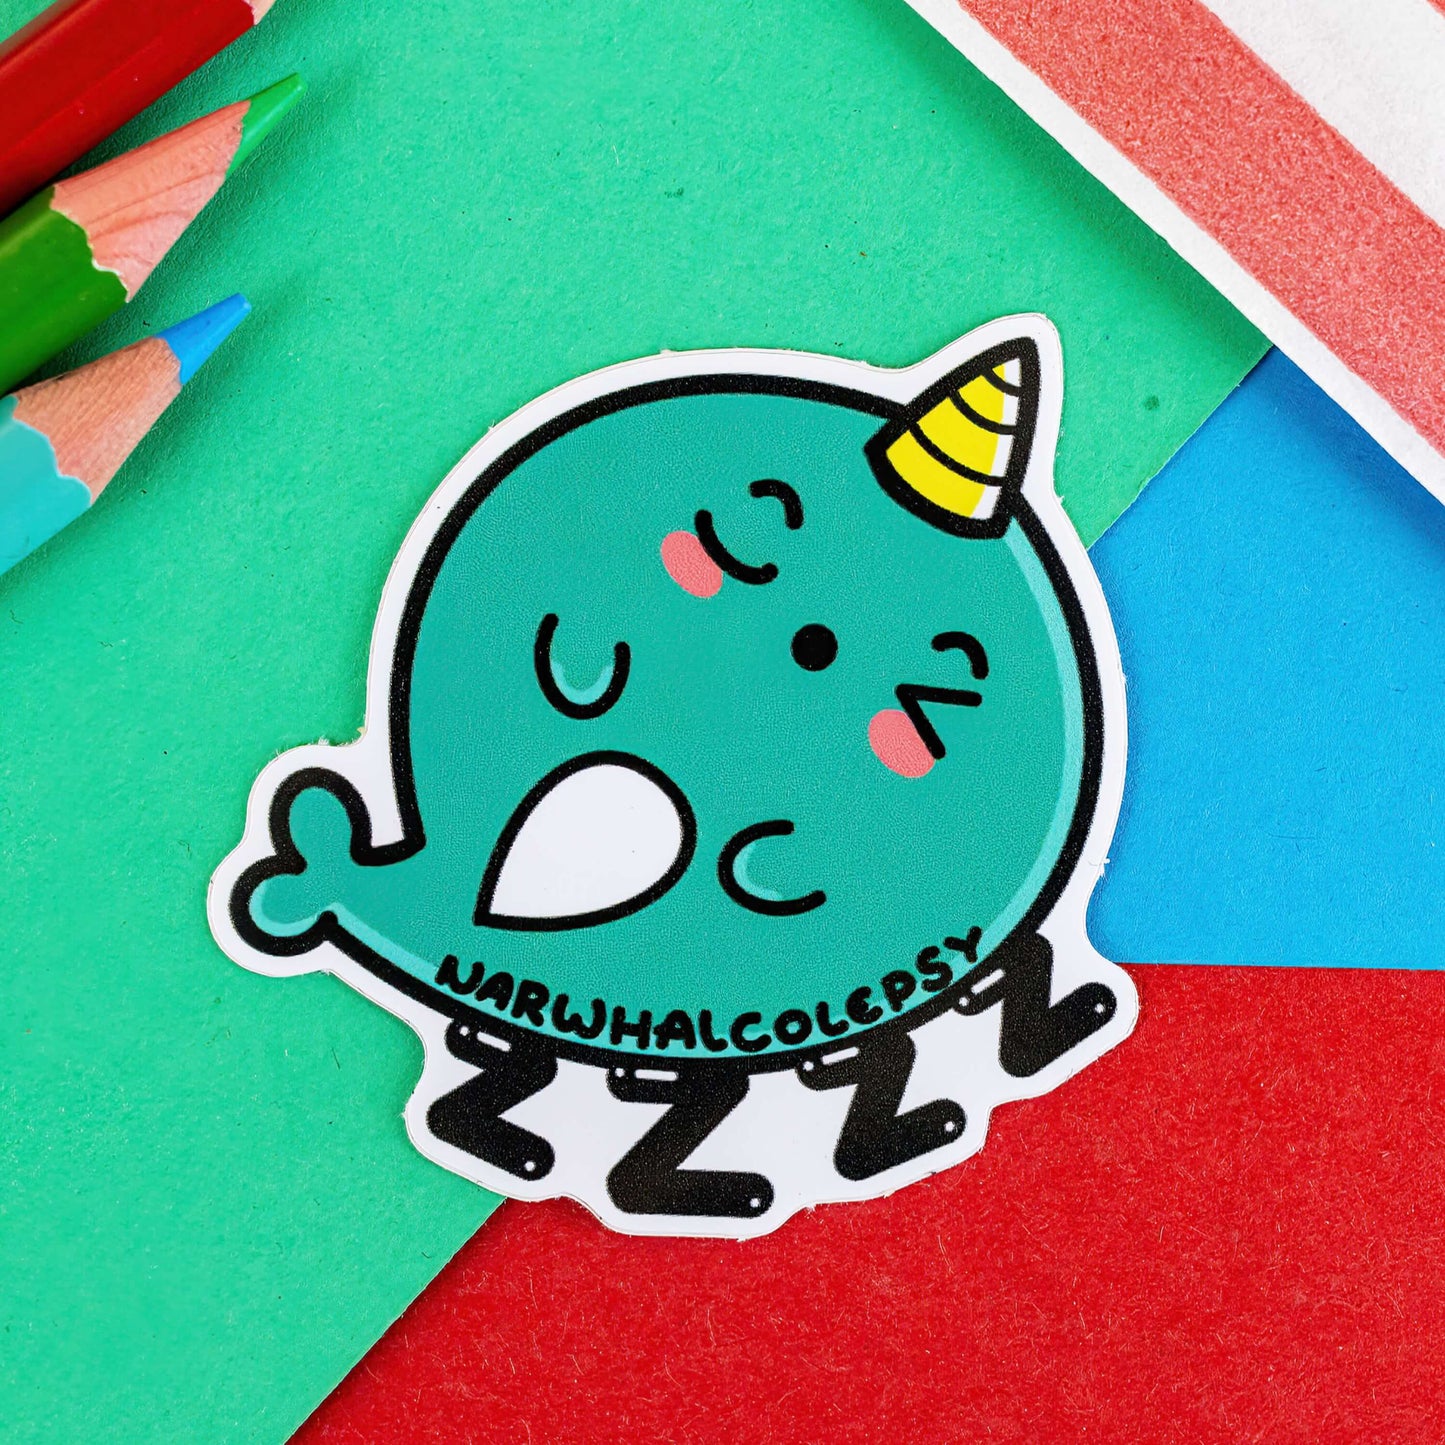 The Narwhalcolepsy Narwhal Sticker - Narcolepsy on a red, blue and green background with colouring pencils and red stripe candy bag. The blue green narwhal shape sticker is sleeping on 4 black Z's with black text reading 'narhwalcolepsy' across its body. The hand drawn design is raising awareness for narcolepsy.